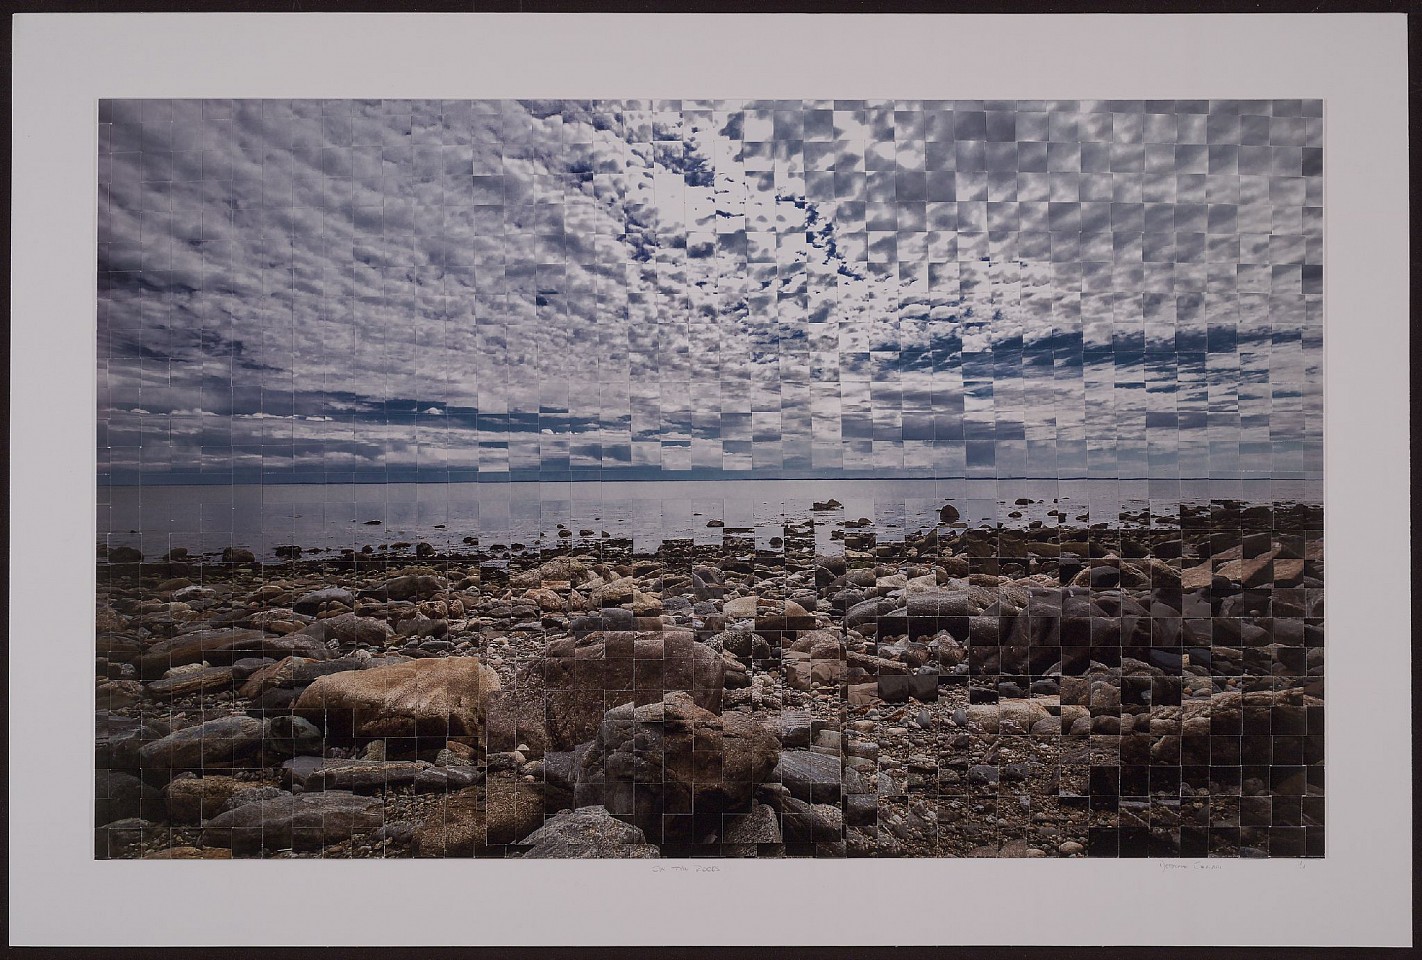 Debranne Cingari, On the Rocks, 2020
Handcrafted Weaved Canson Archival Photograph, 26 x 42 in. (66 x 106.7 cm)
DC200702